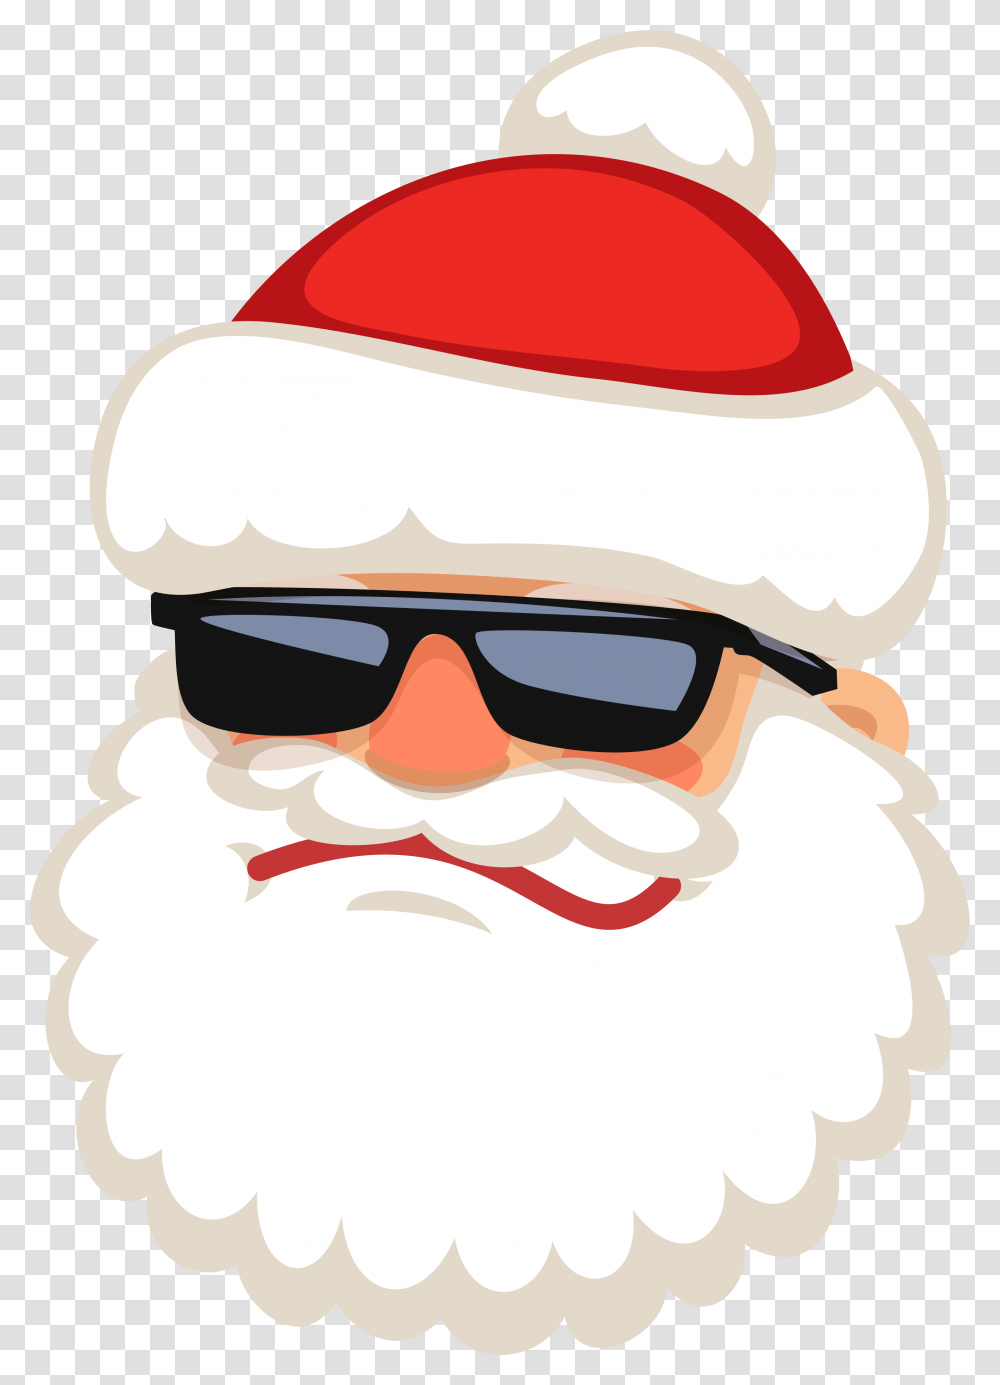 Reindeer Claus Santa Handsome Free Photo Clipart Santa Claus Reindeers Clipart Free, Sunglasses, Accessories, Accessory, Face Transparent Png